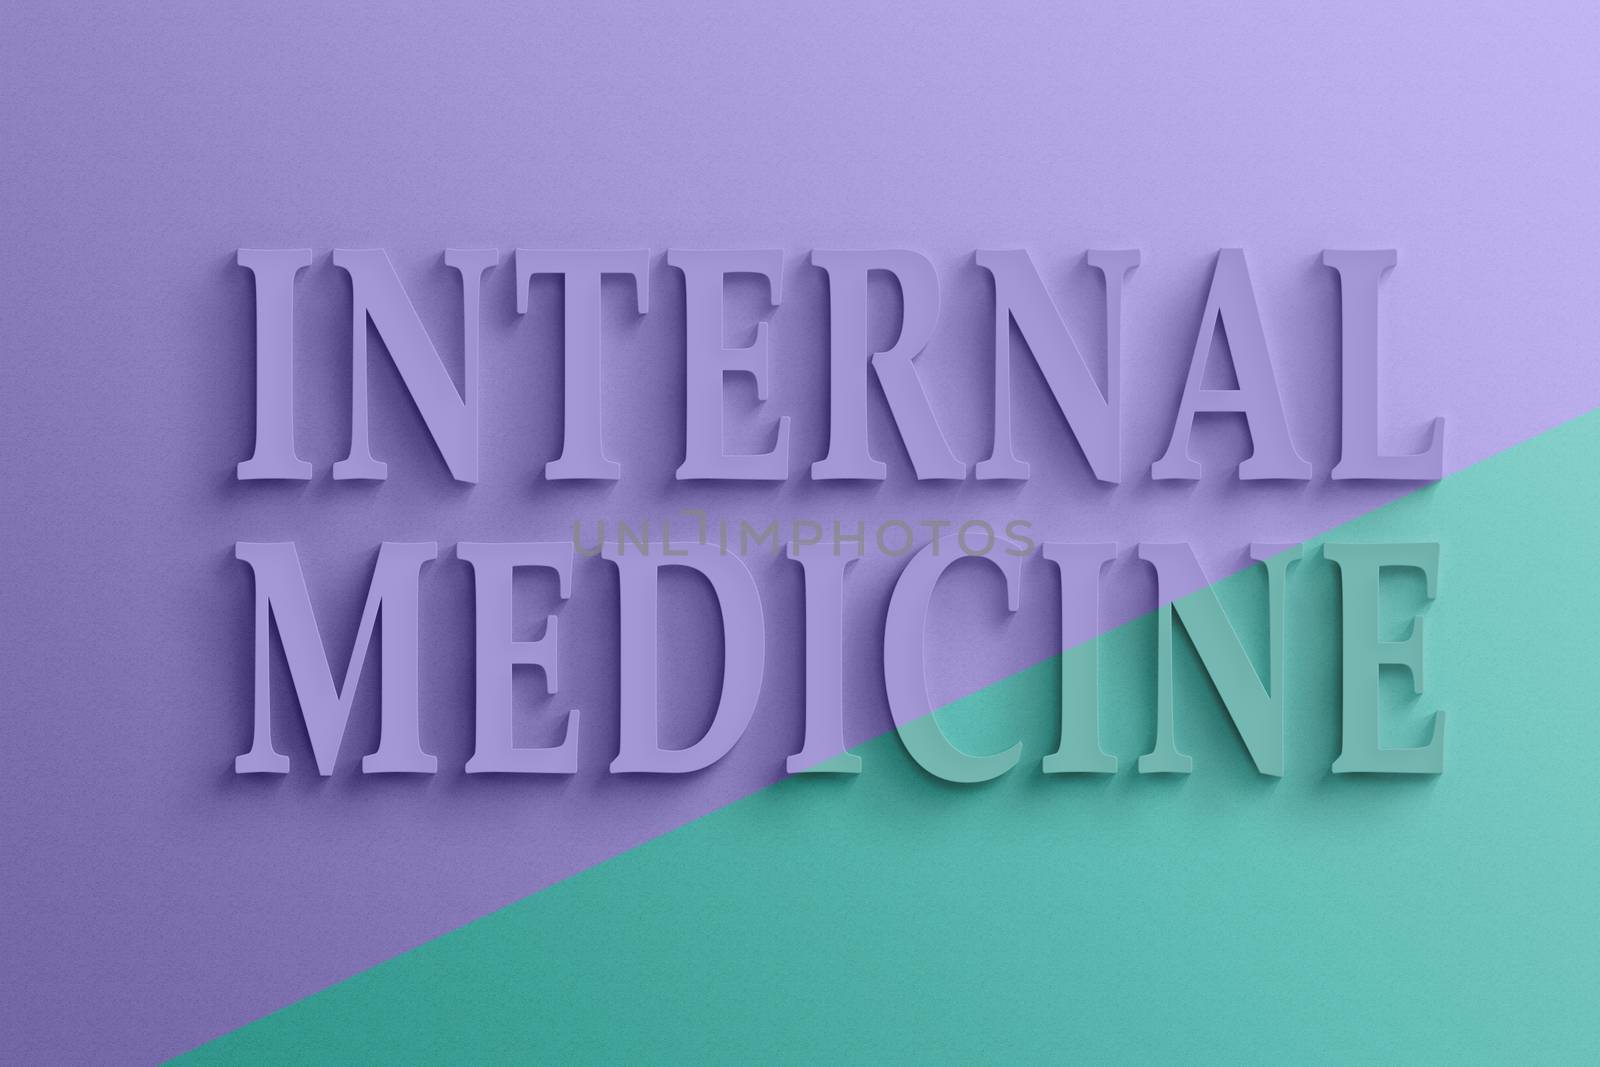 3D text with shadow and reflection, internal medicine.